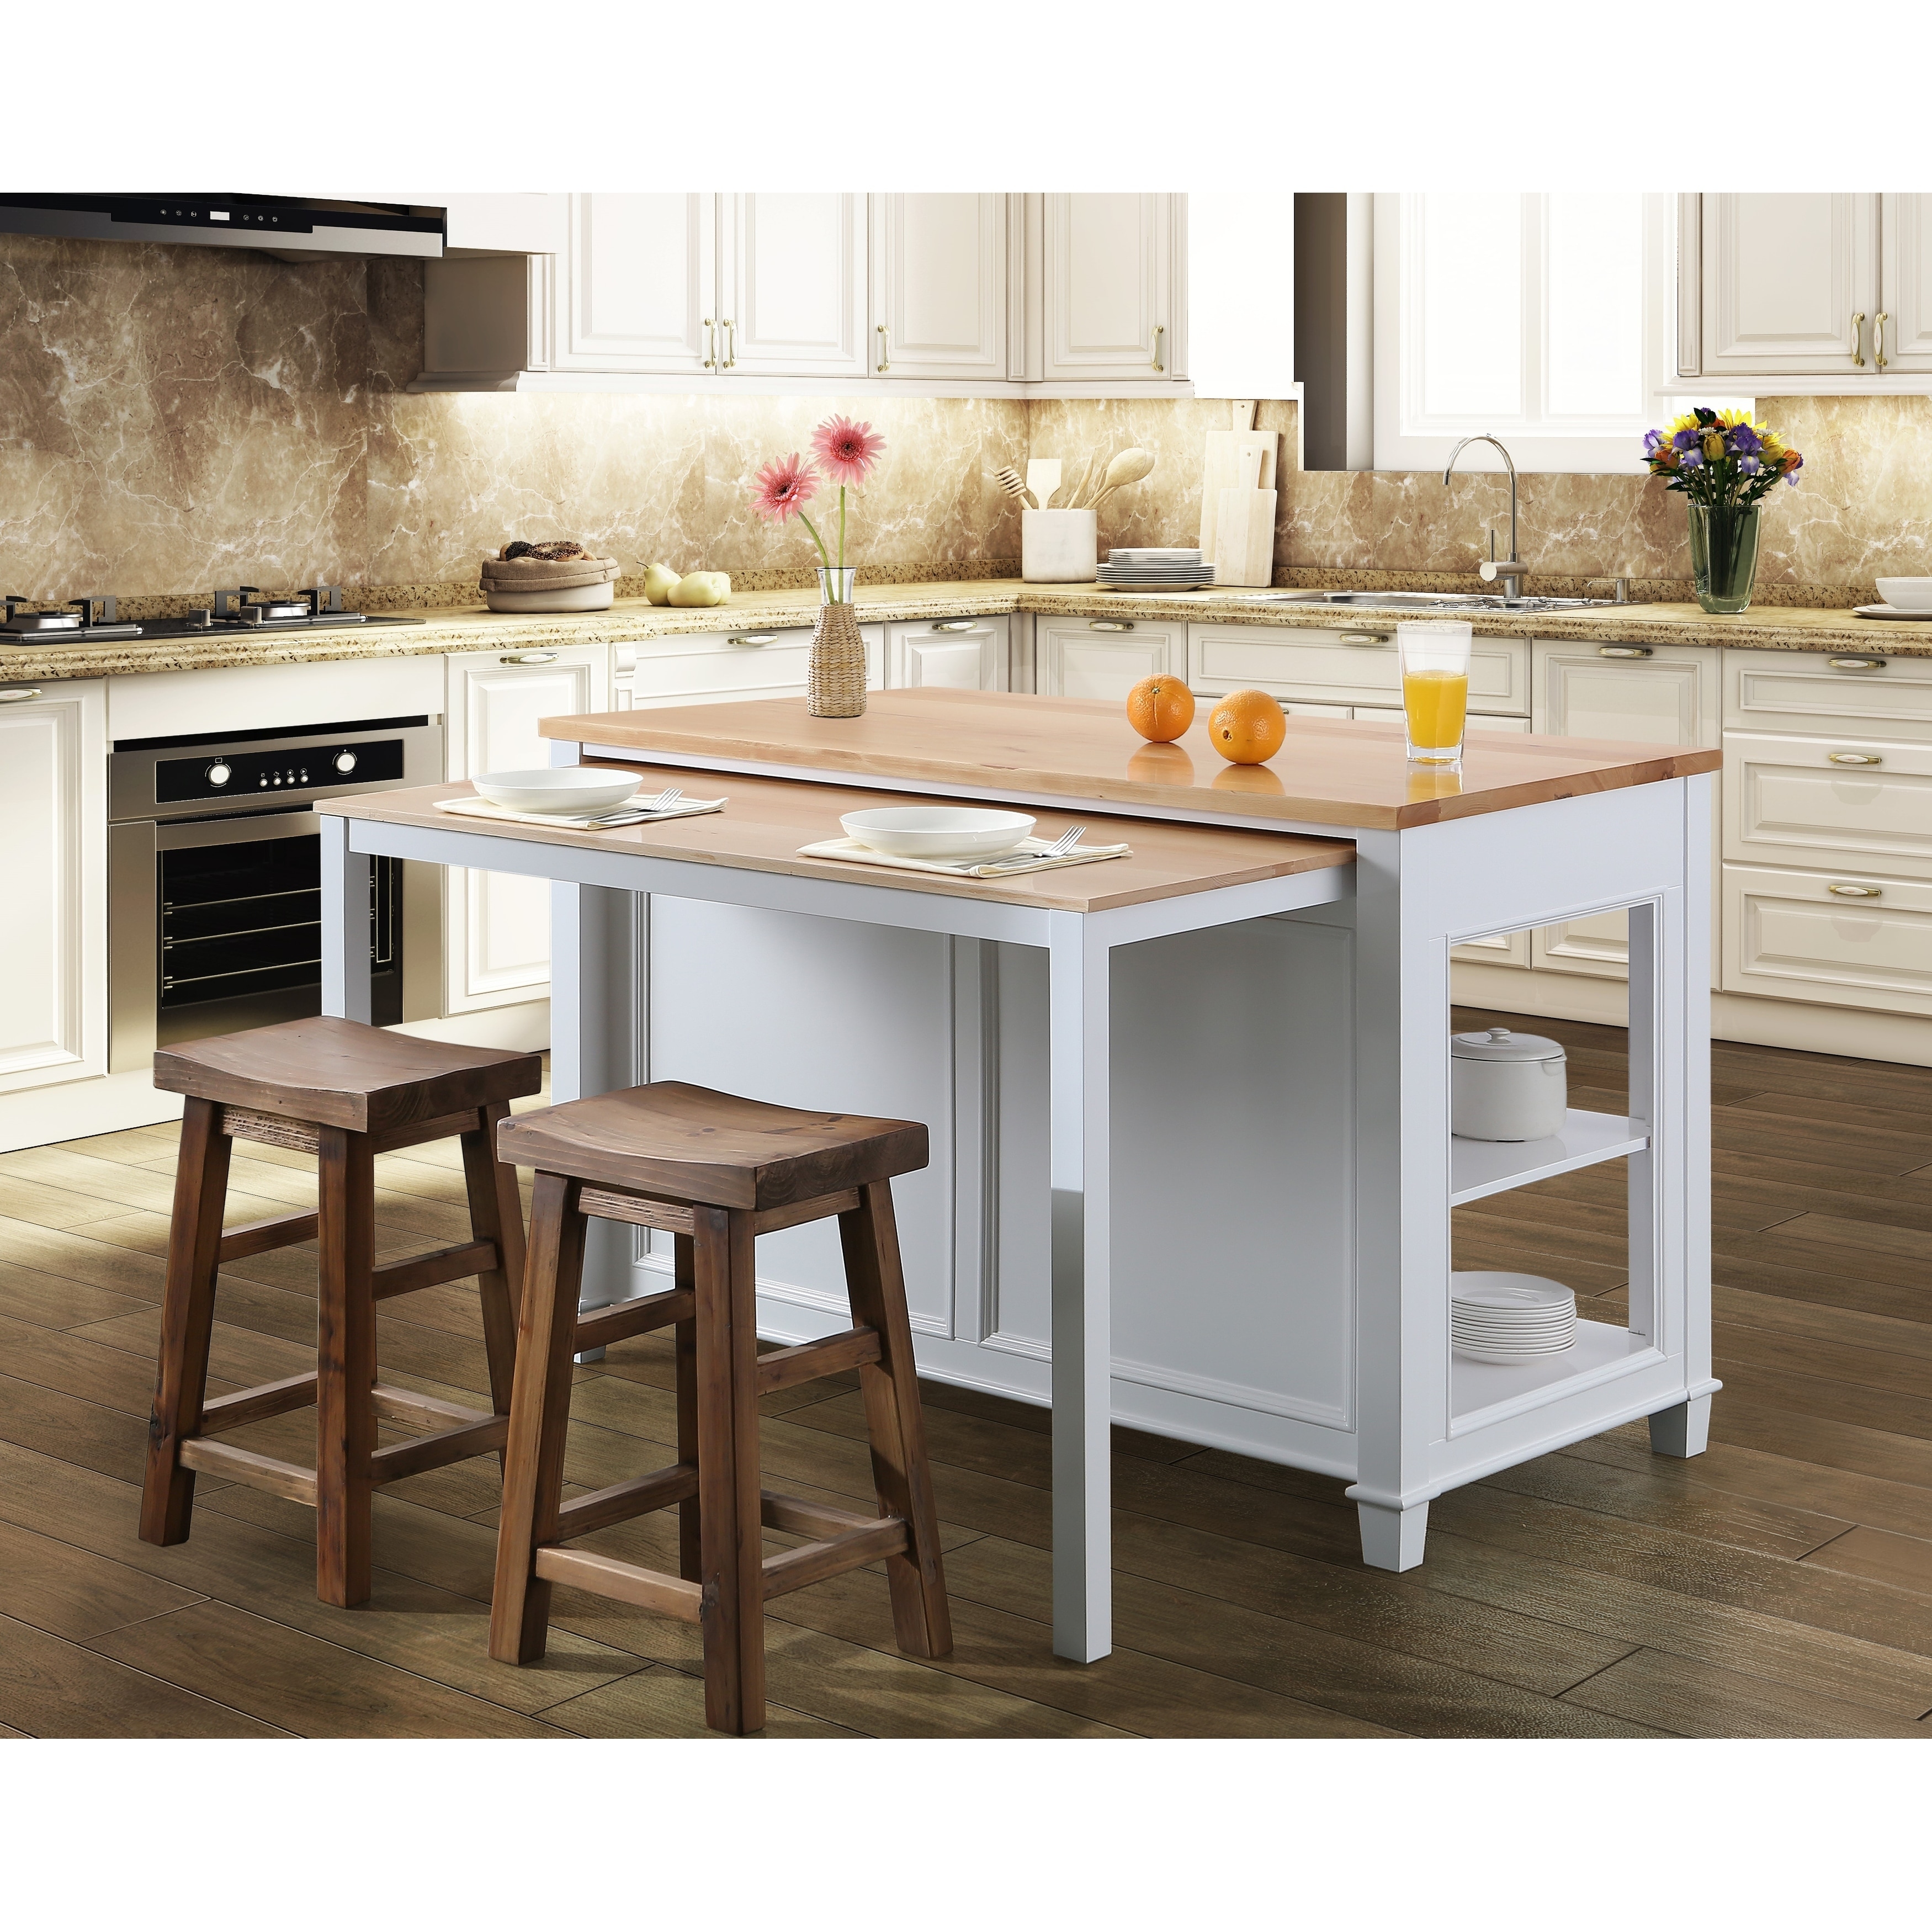 Medley 54 In Kitchen Island With Slide Out Table In White N A Overstock 29108677